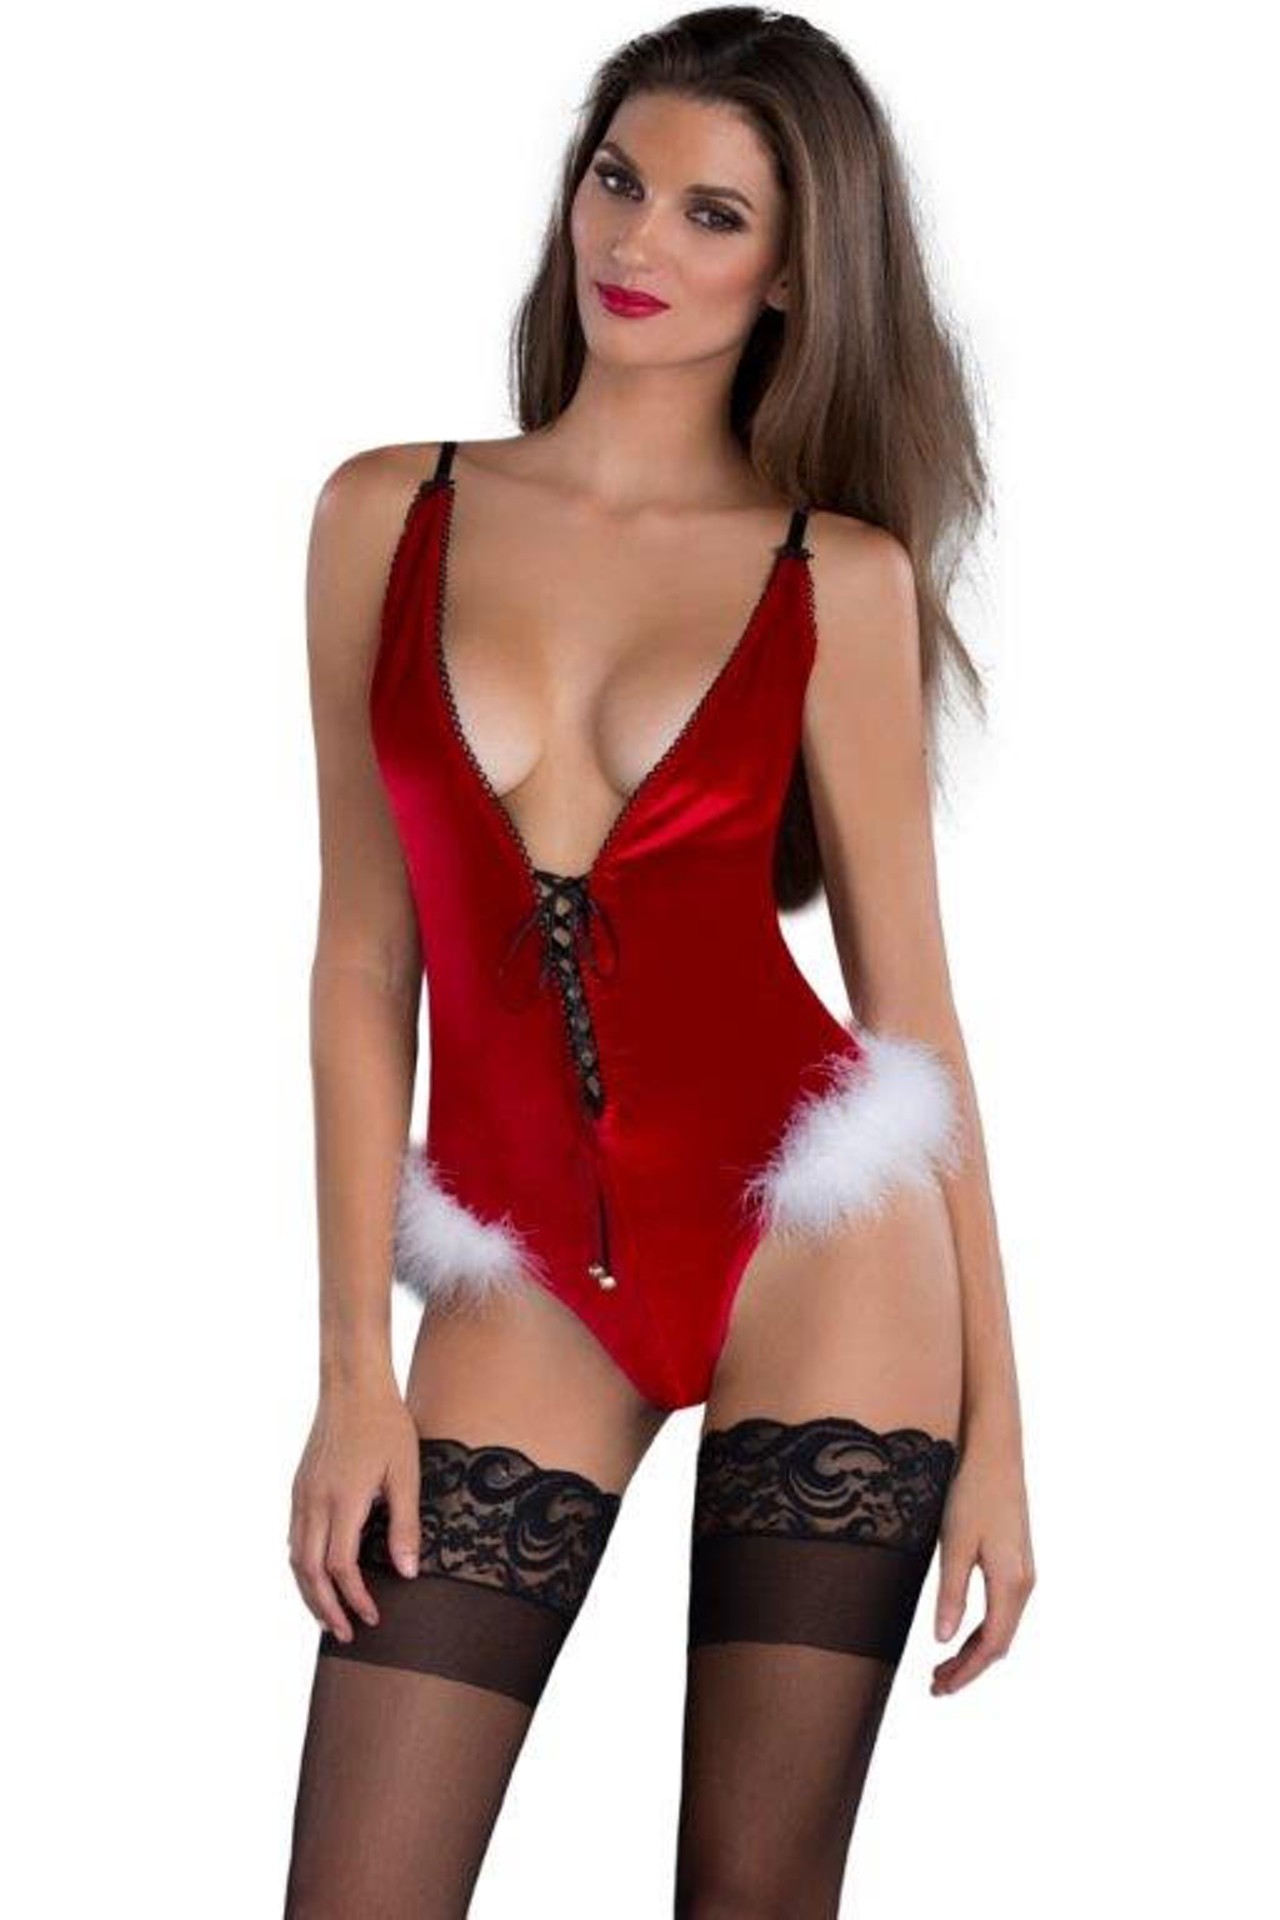 20 NSFW outfits from Lover's Lane to heat up the holidays this season